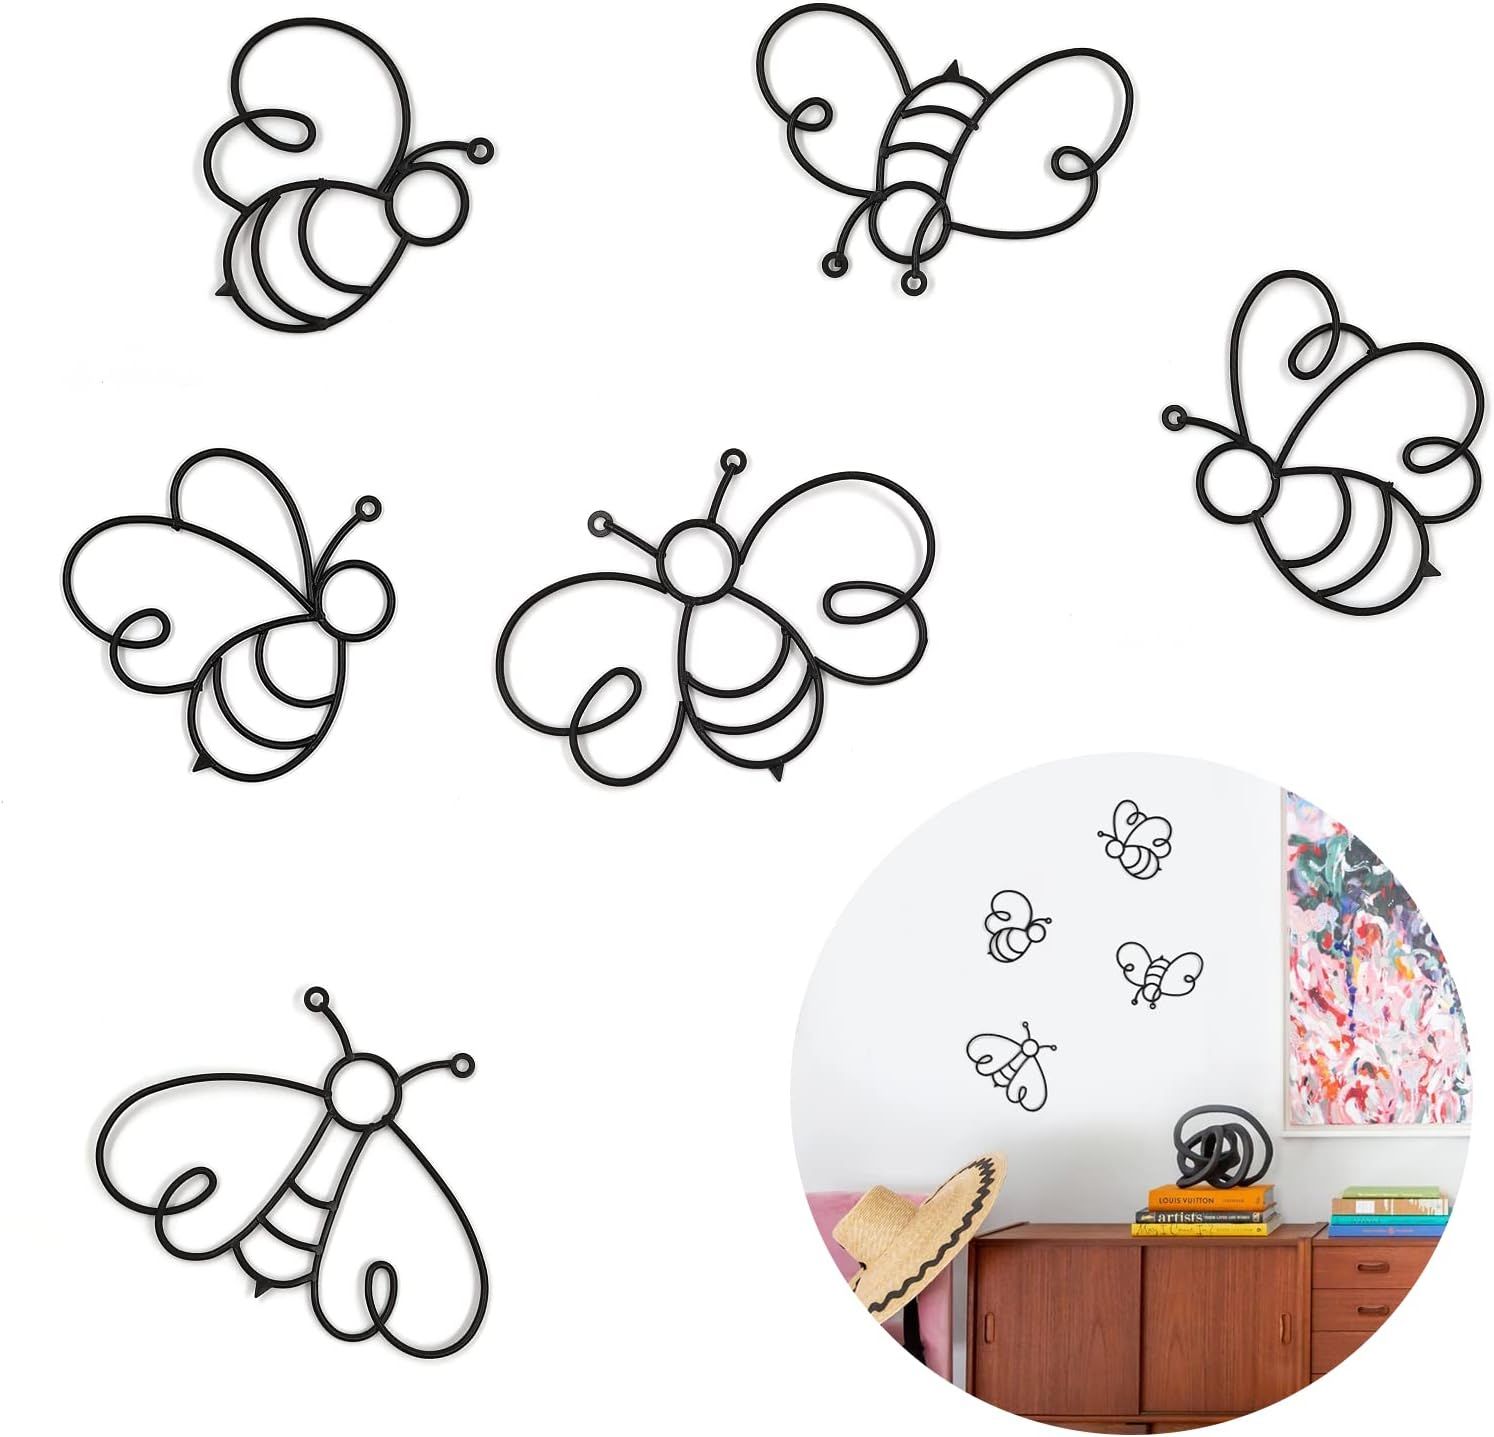 Bee Metal Wall Art, Qmetalart 6pcs Bee Decor Bumble | Ubuy India Throughout Most Recently Released Metal Wall Bumble Bee Wall Art (View 20 of 20)